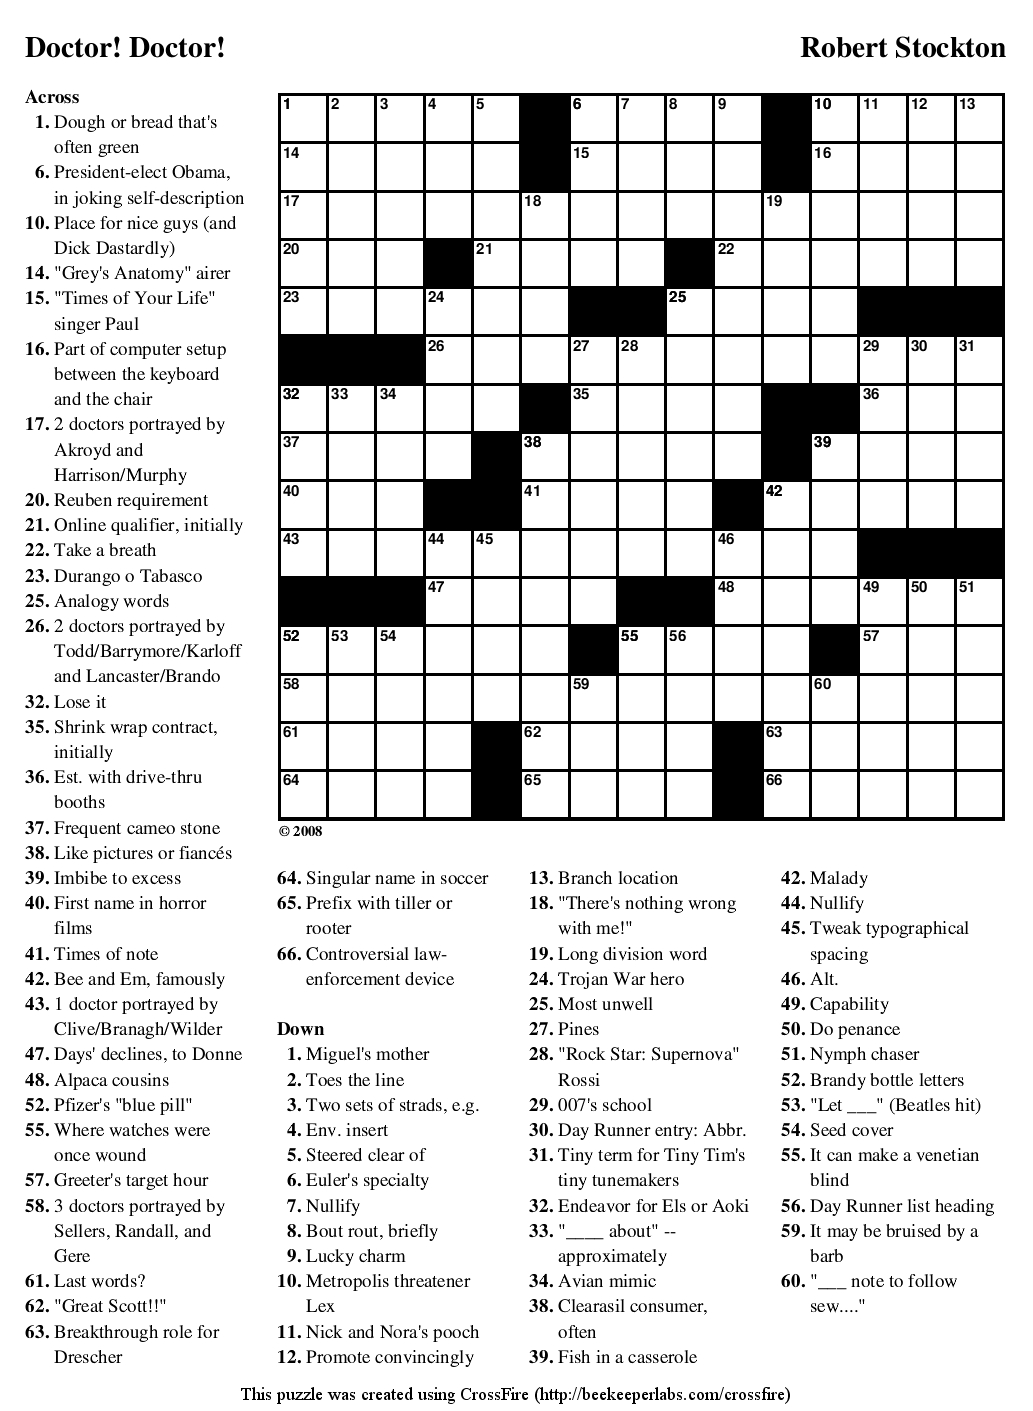 Crossword Puzzles Printable - Yahoo Image Search Results | Crossword - Free Printable Crossword Puzzle Of The Day